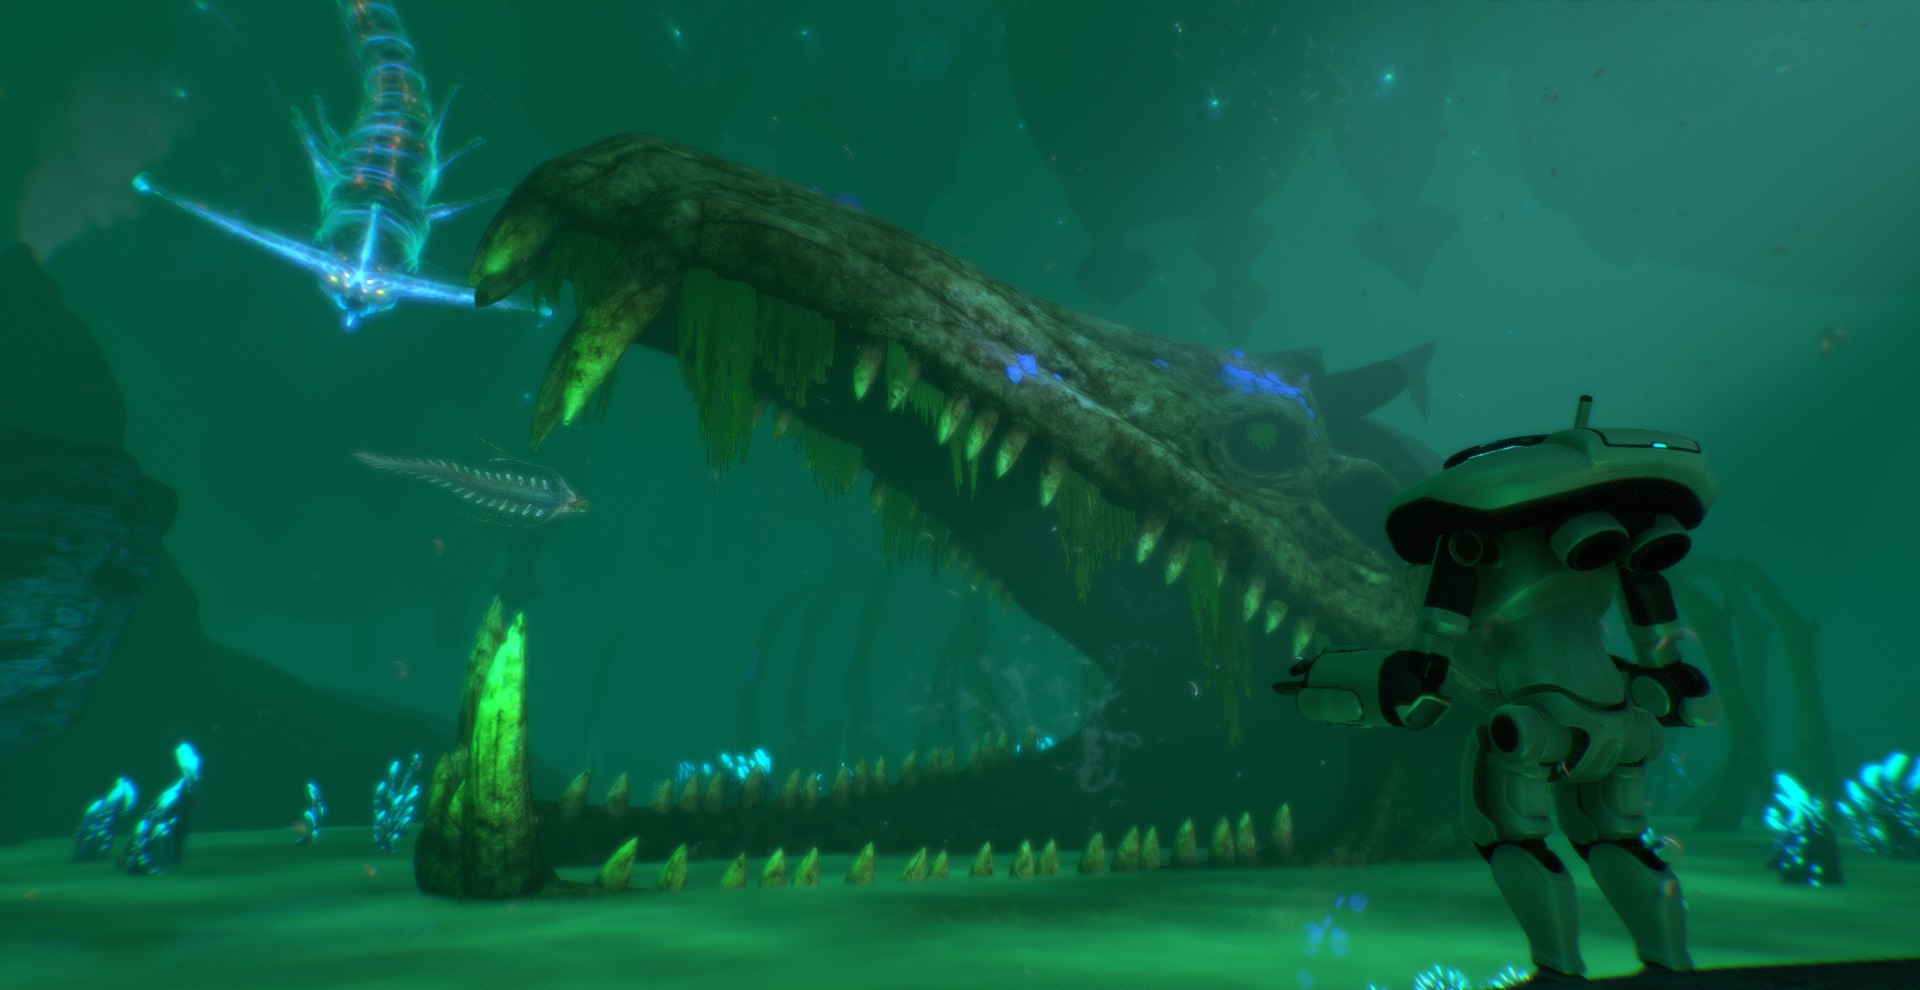 Full Version of Underwater Sandbox-Survival Game Subnautica Now Available